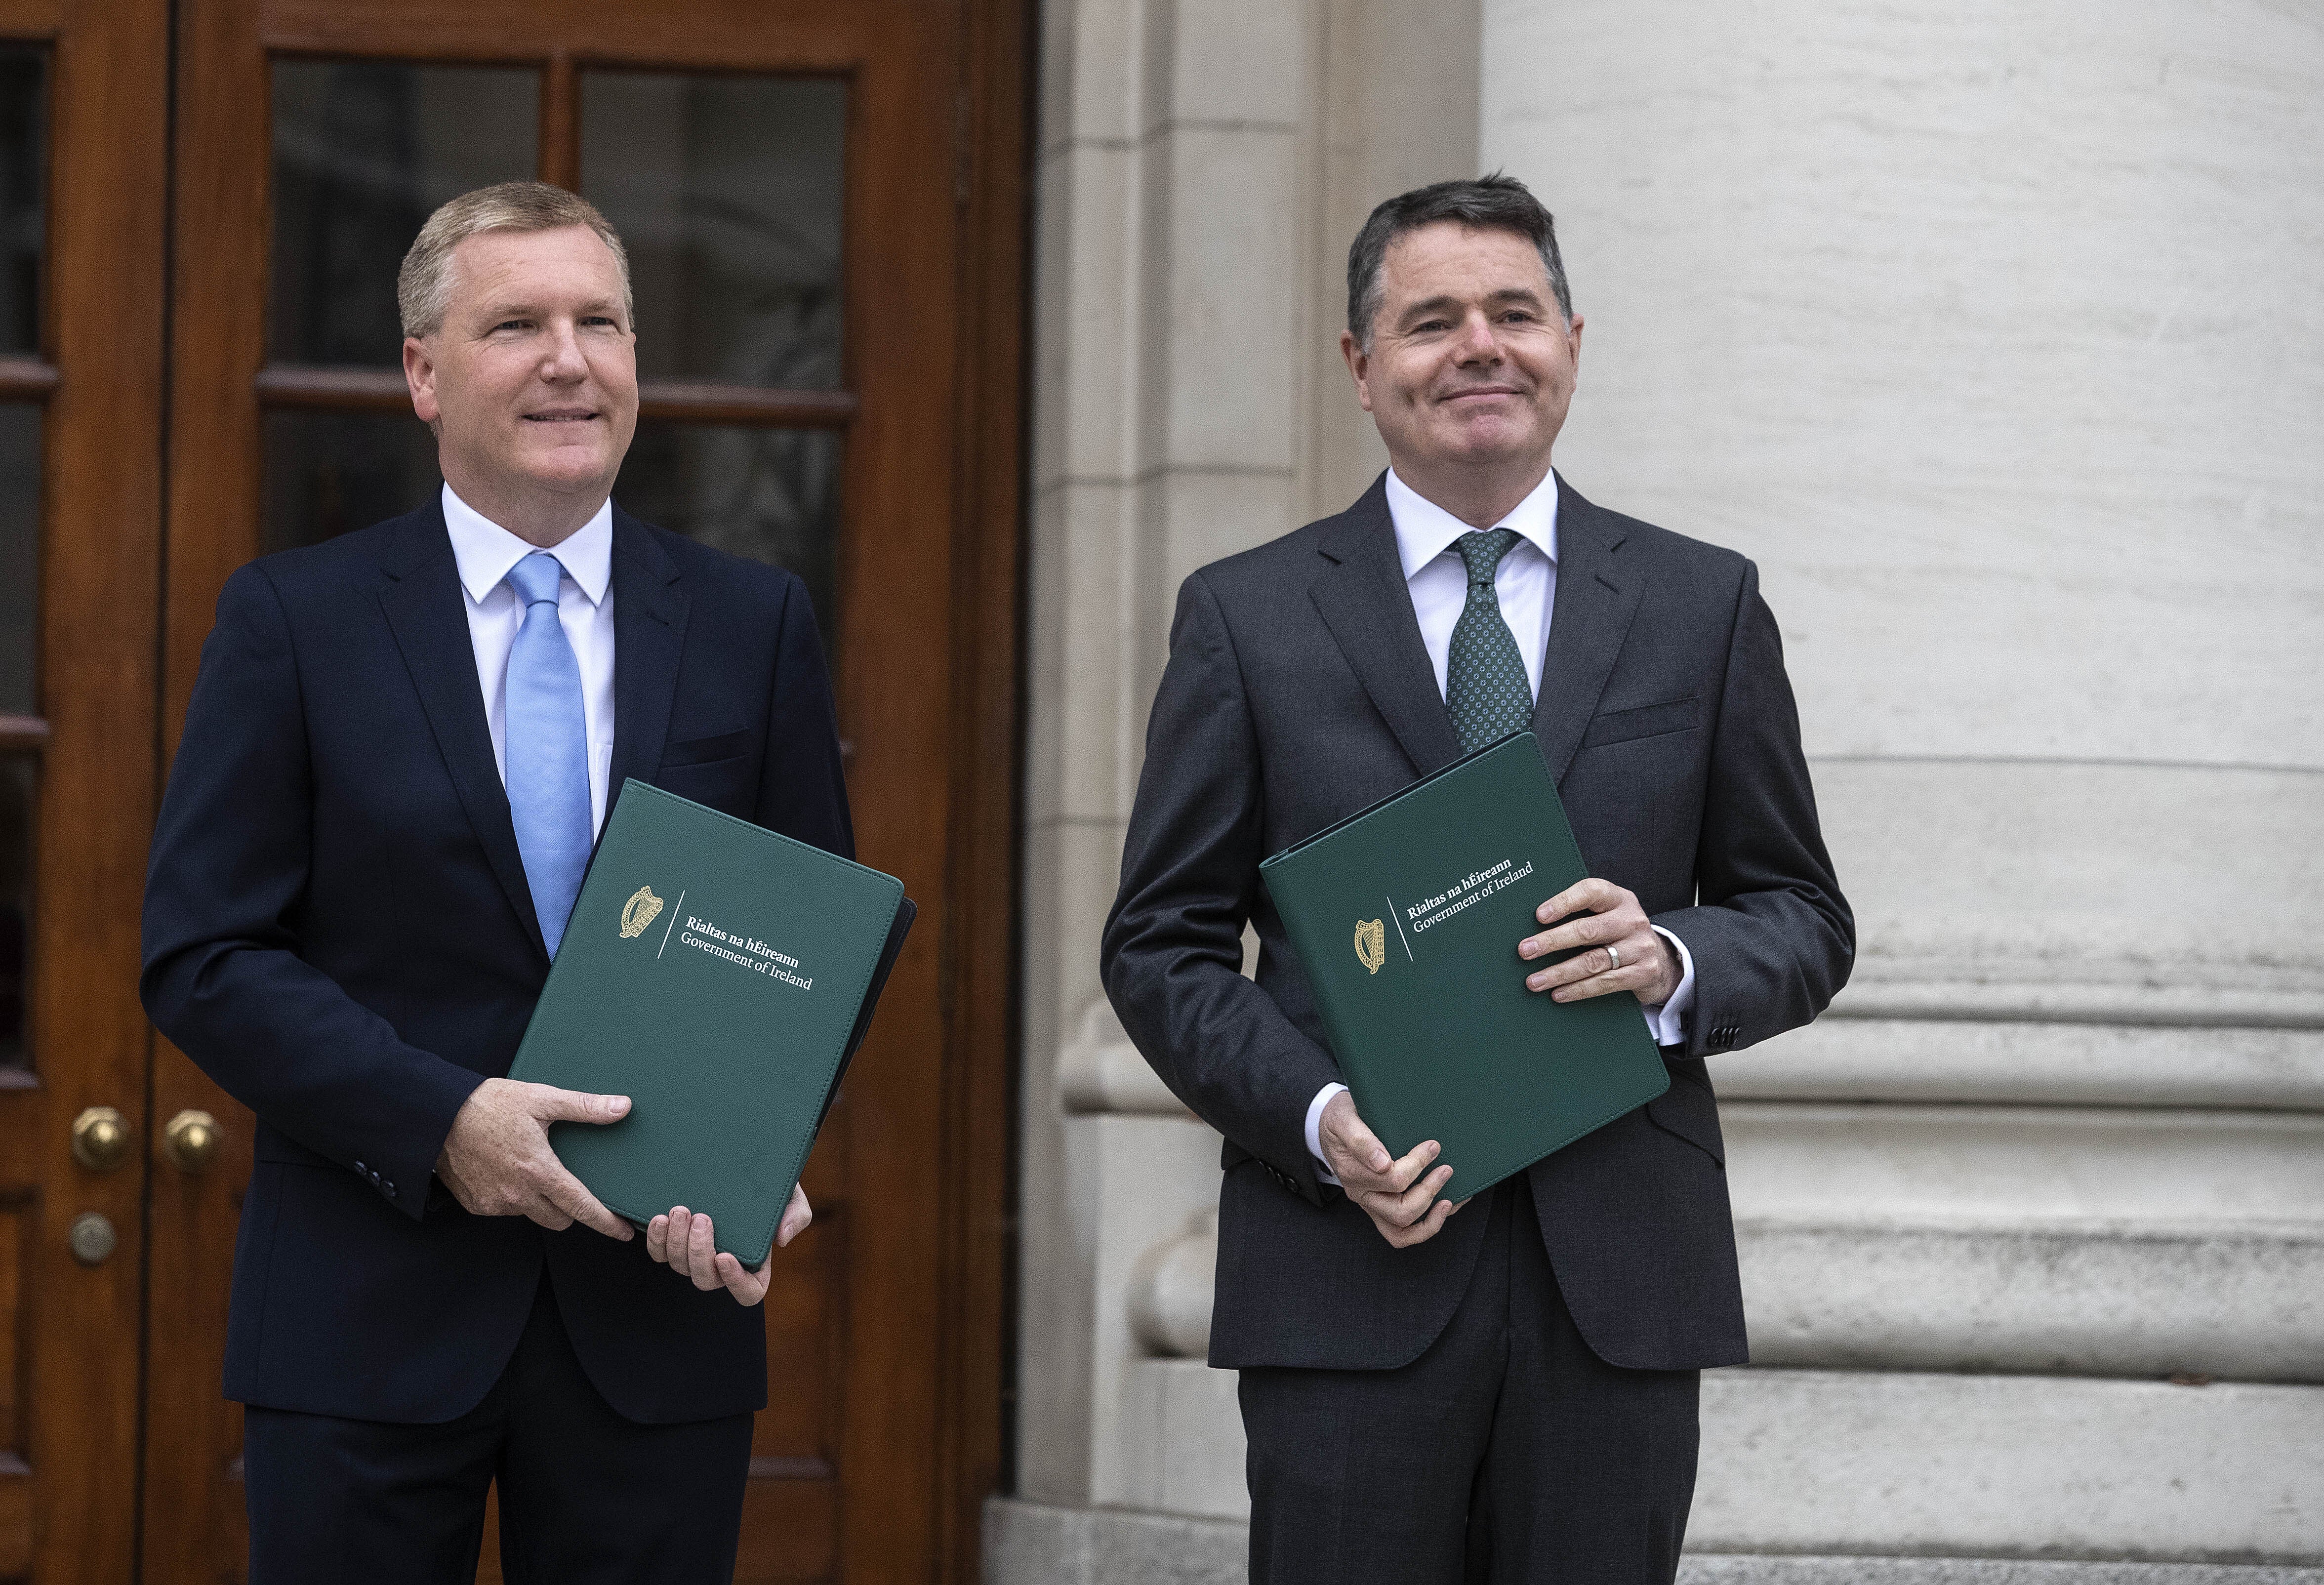 Michael McGrath and Paschal Donohoe (Damien Eagers/PA)